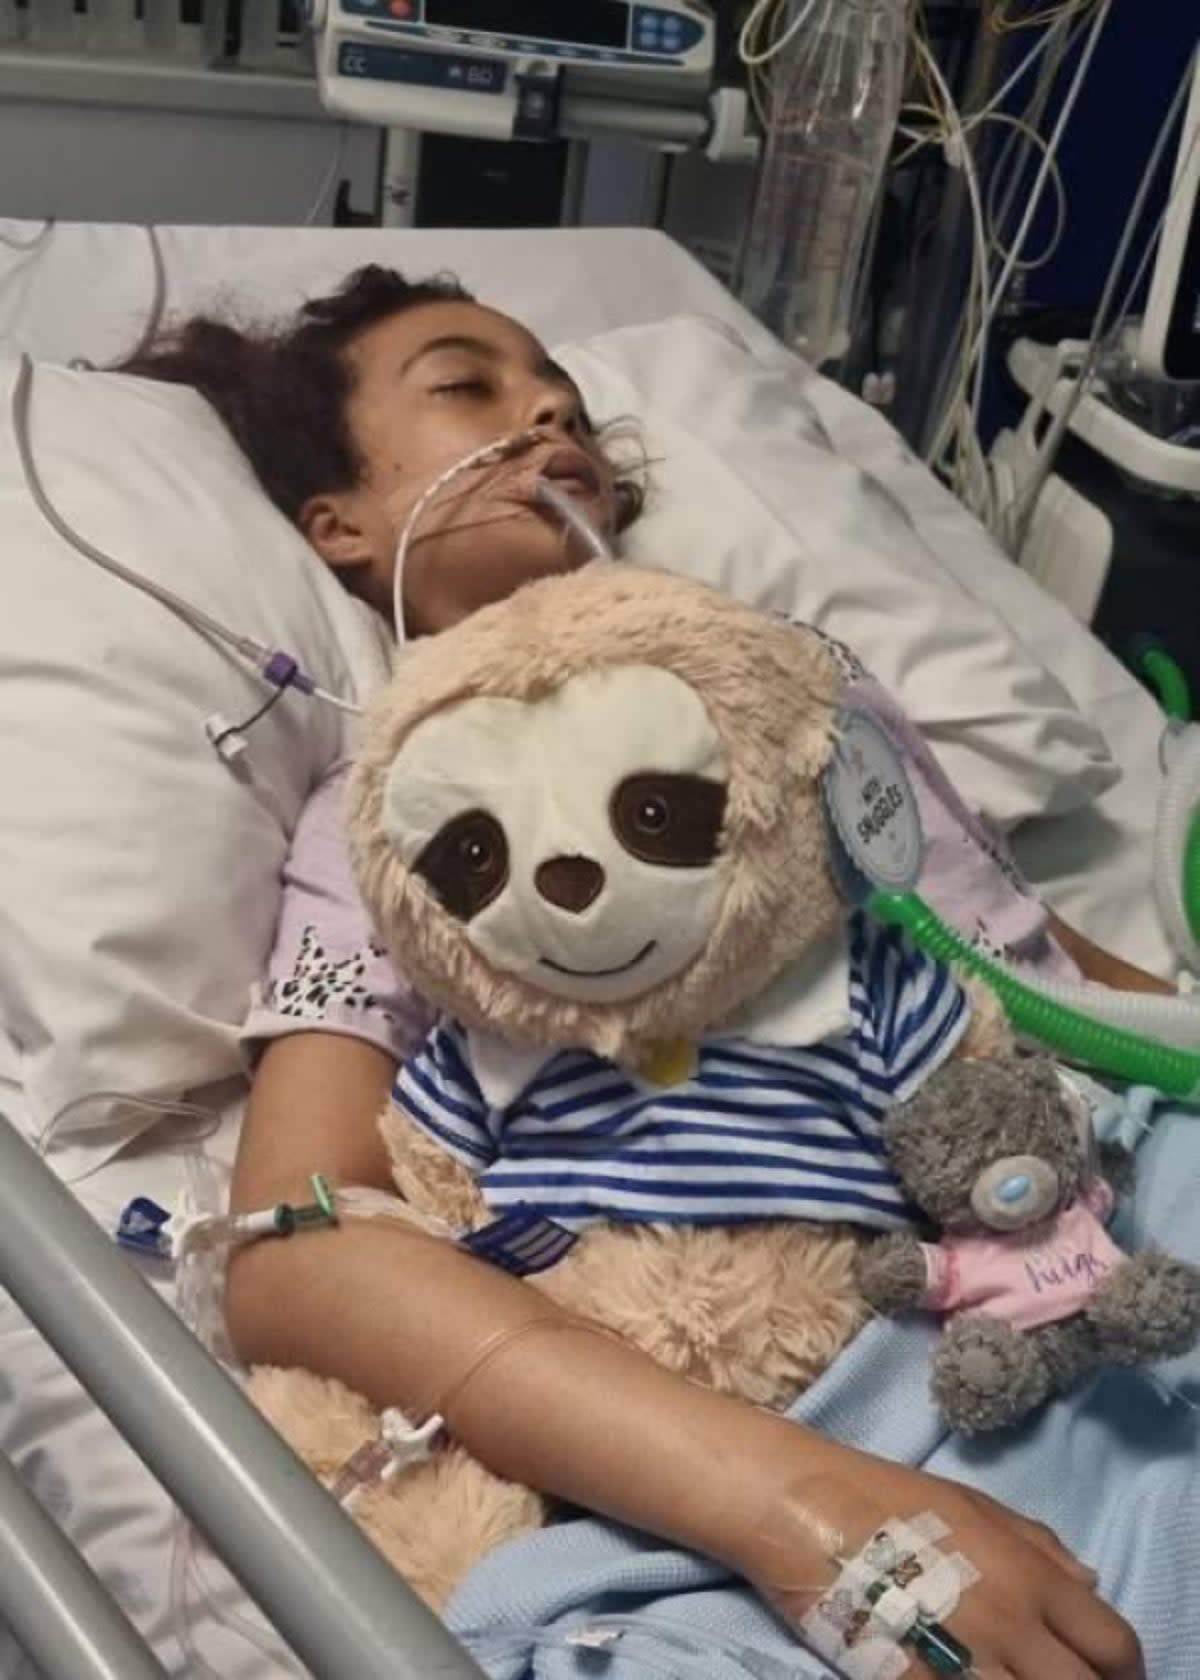 The 12-year-old’s family were worried she wouldn’t pull through (NICHS)